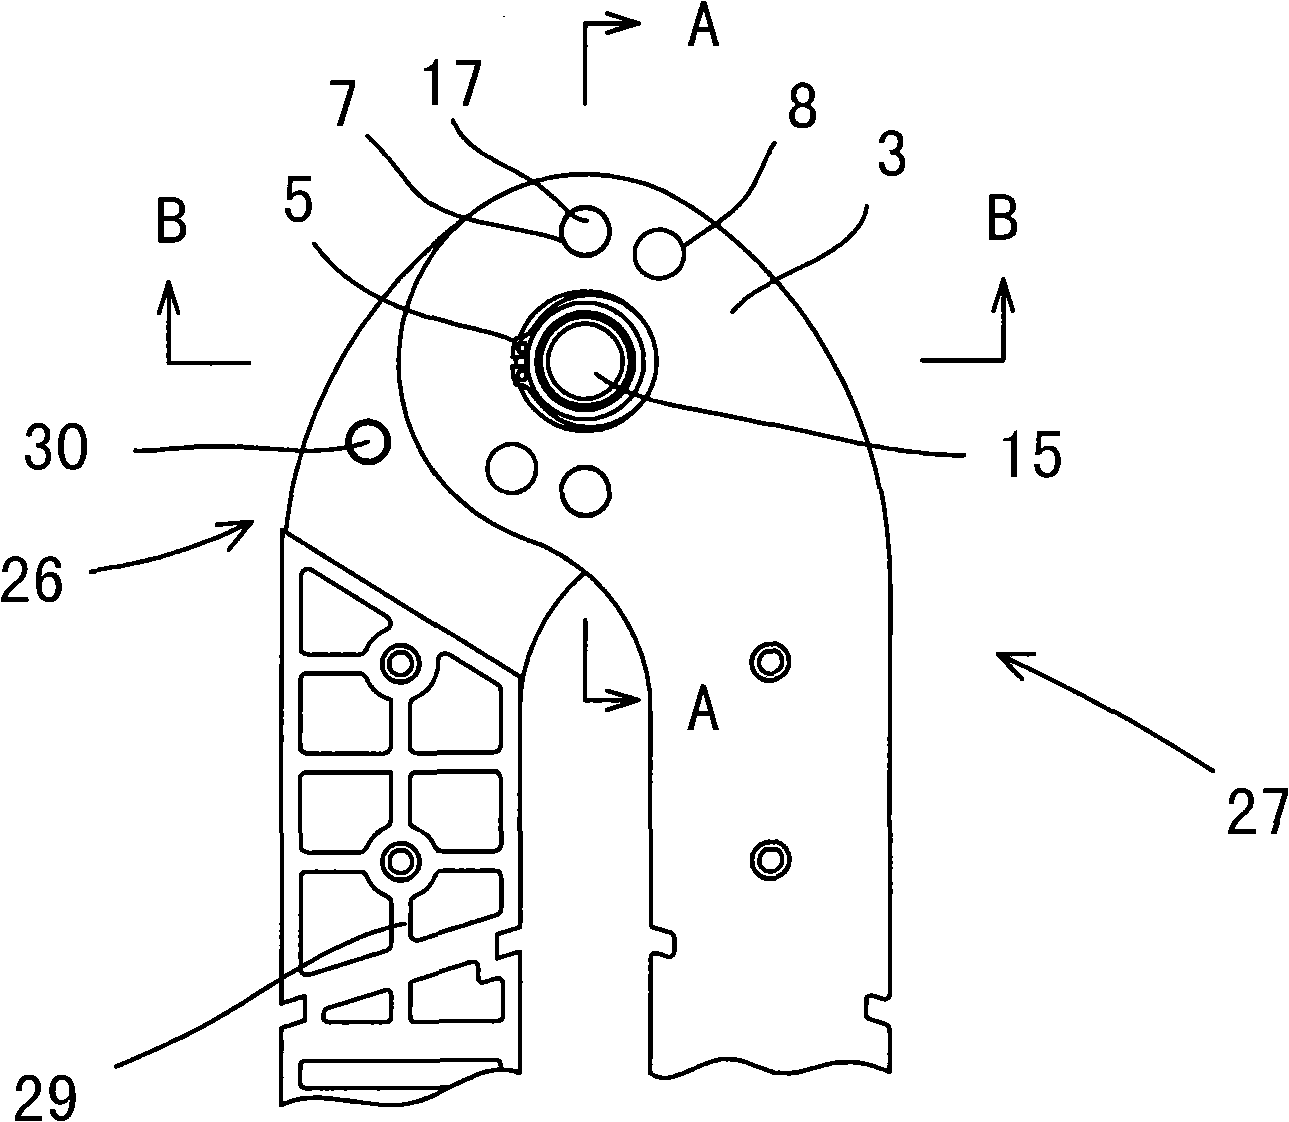 Hinged joint positioning apparatus